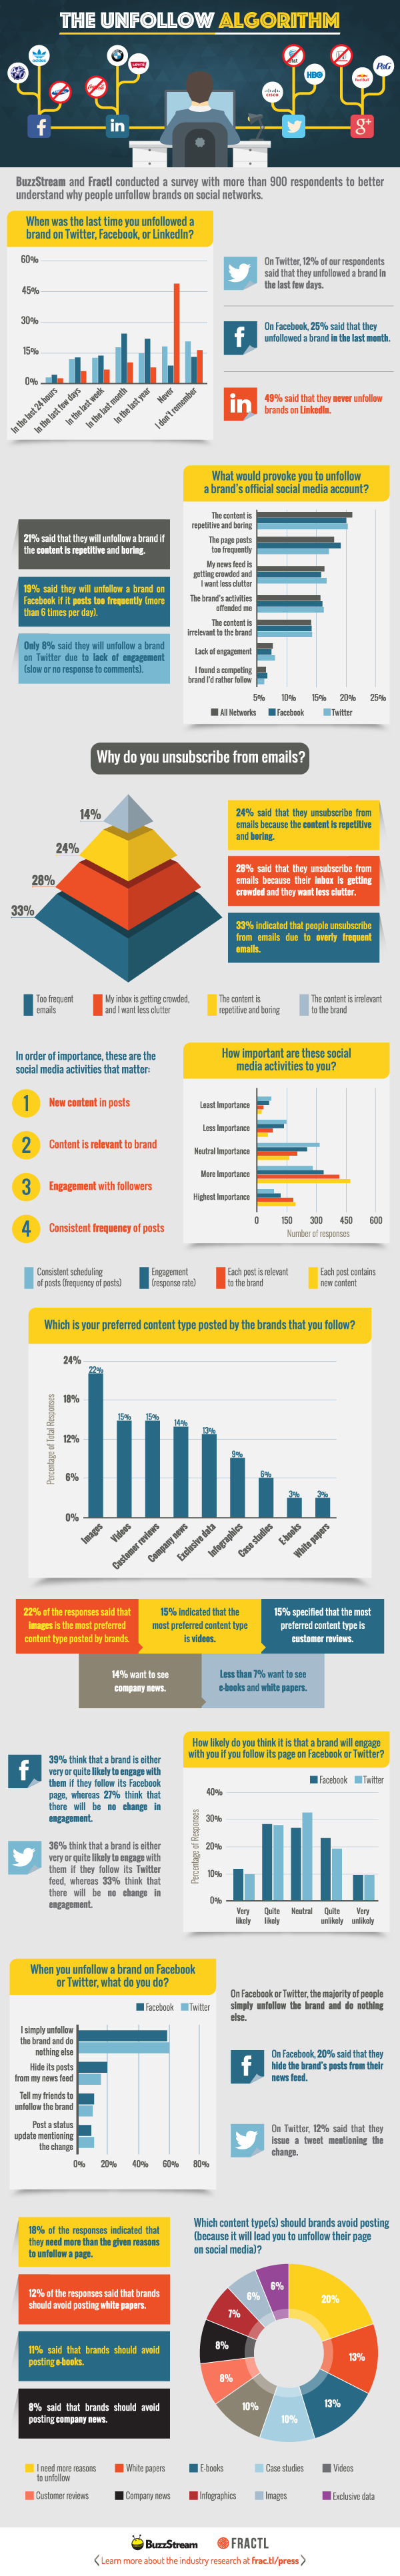 Infographie 190 - Why people unfollow brands on social media